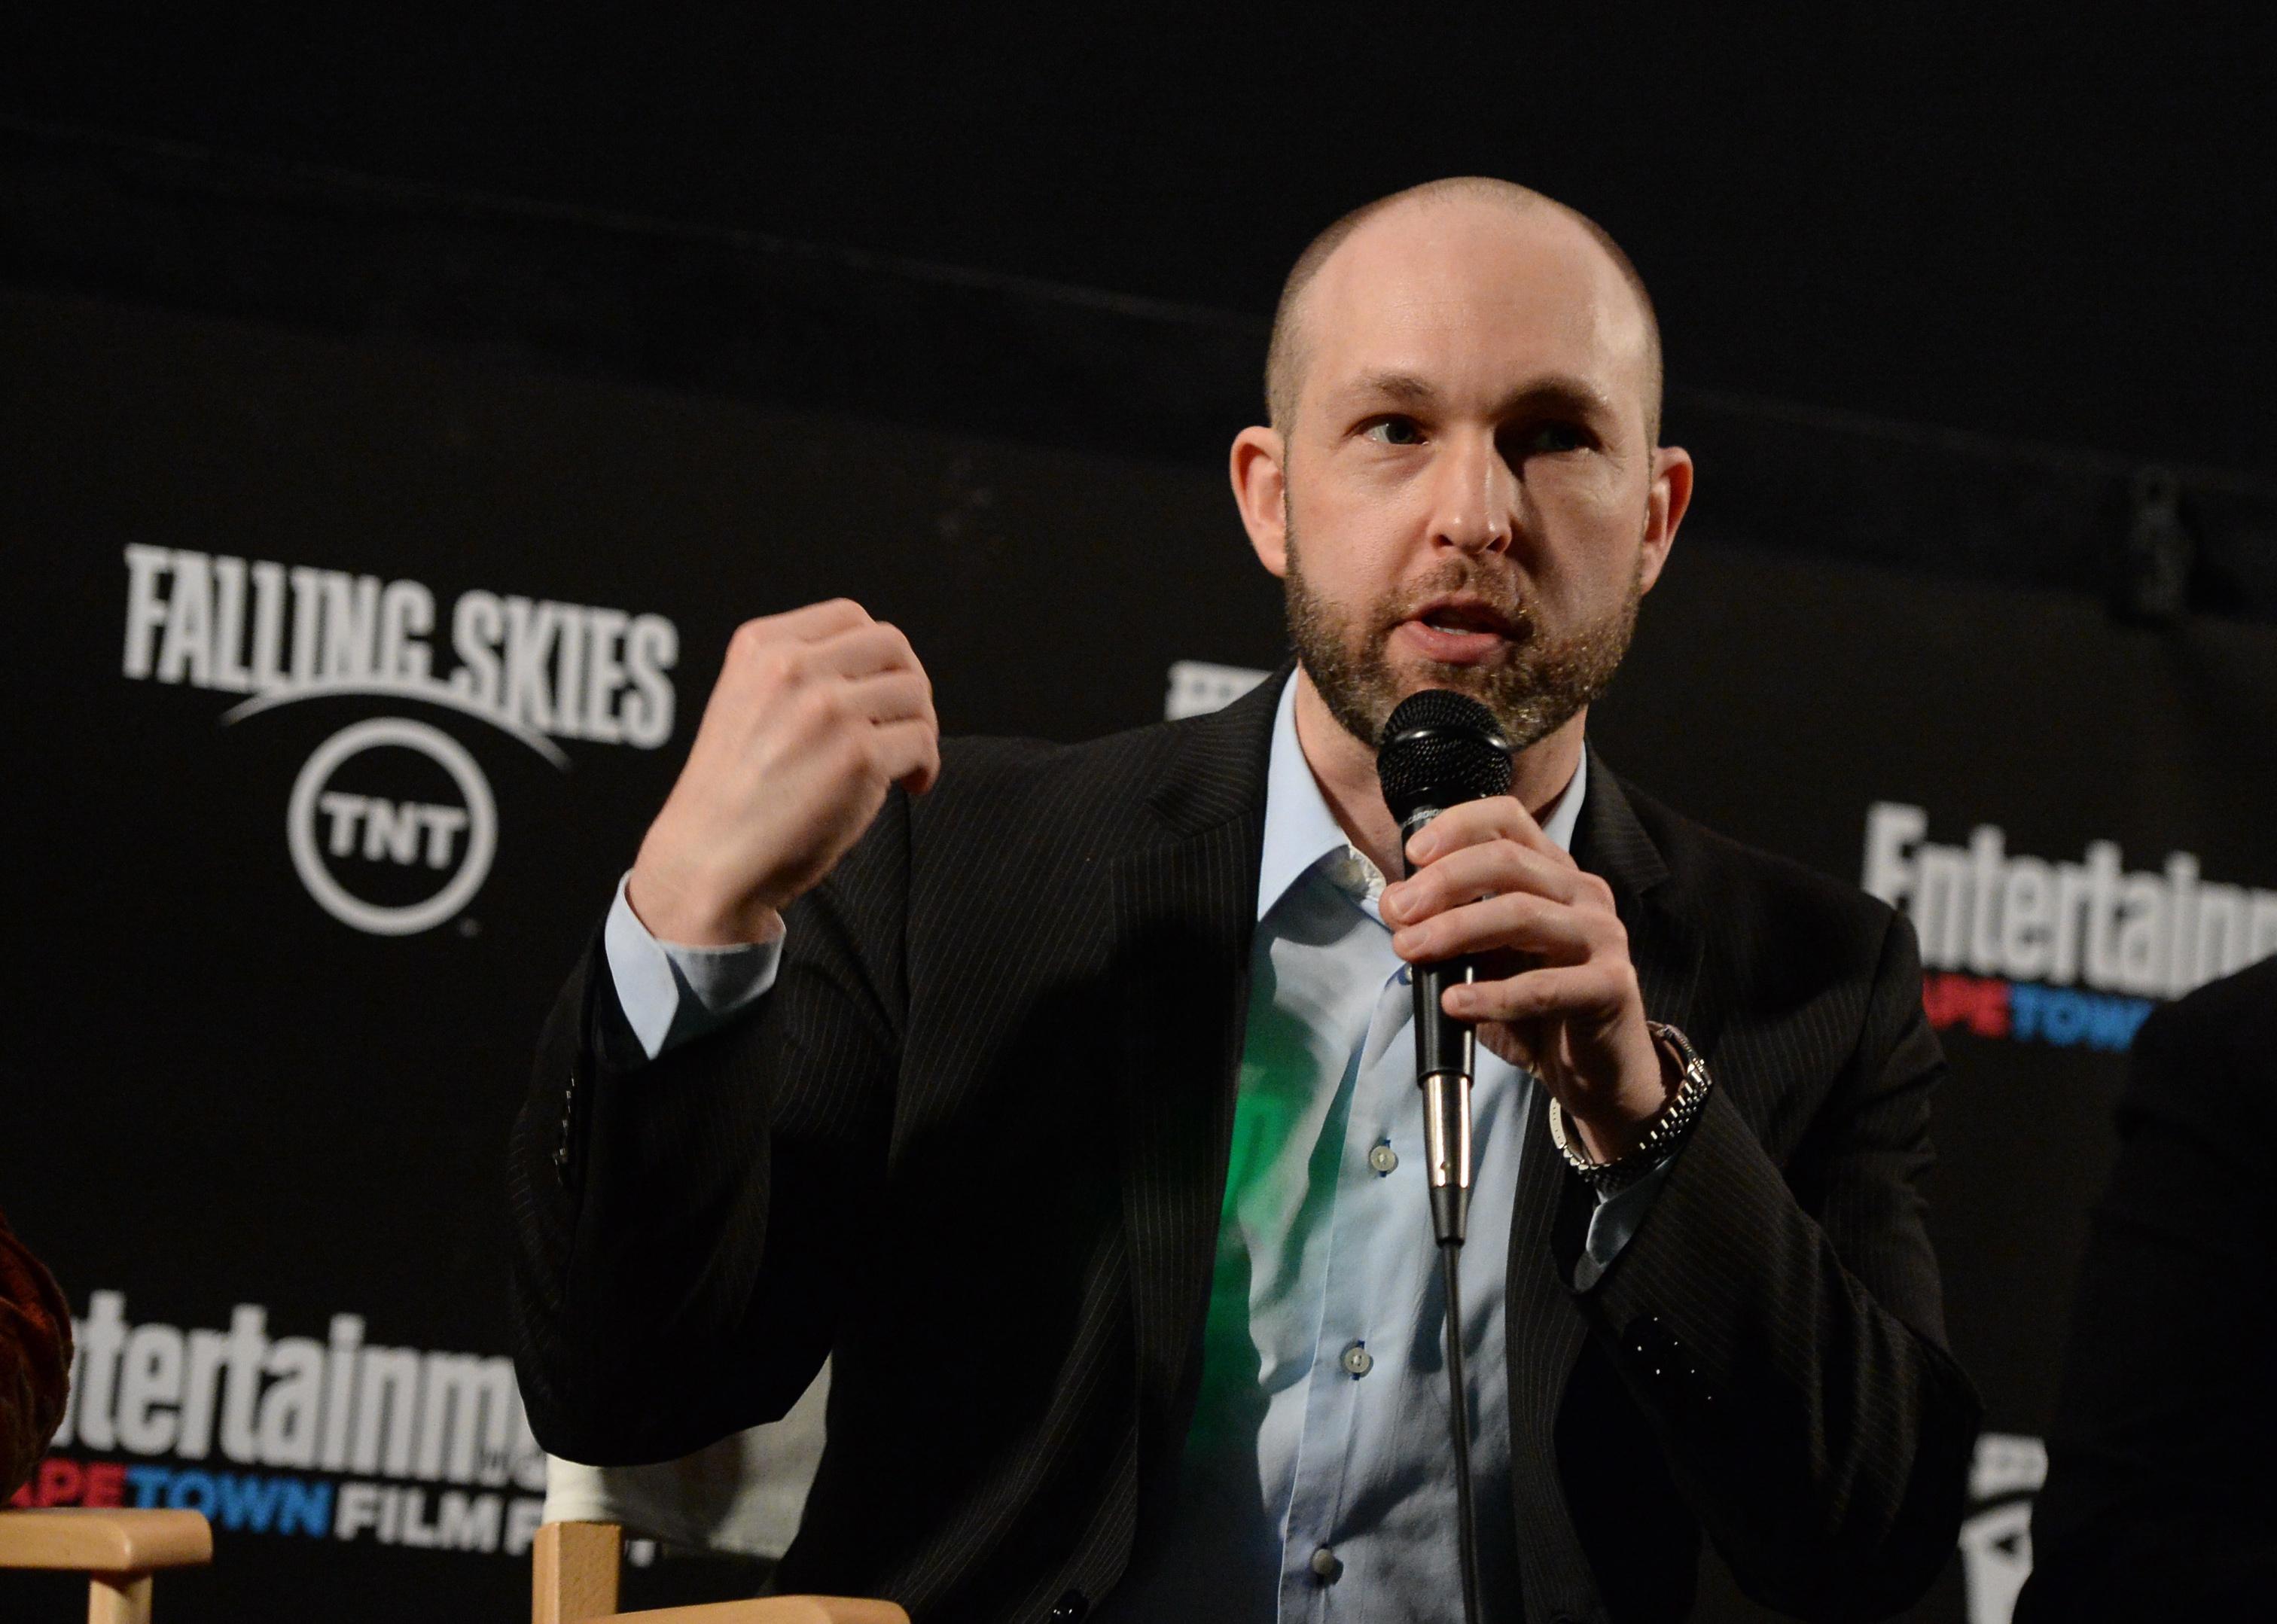  Jeff Cohen attends the screening for "Goonies" during the Entertainment Weekly CapeTown Film Festival 